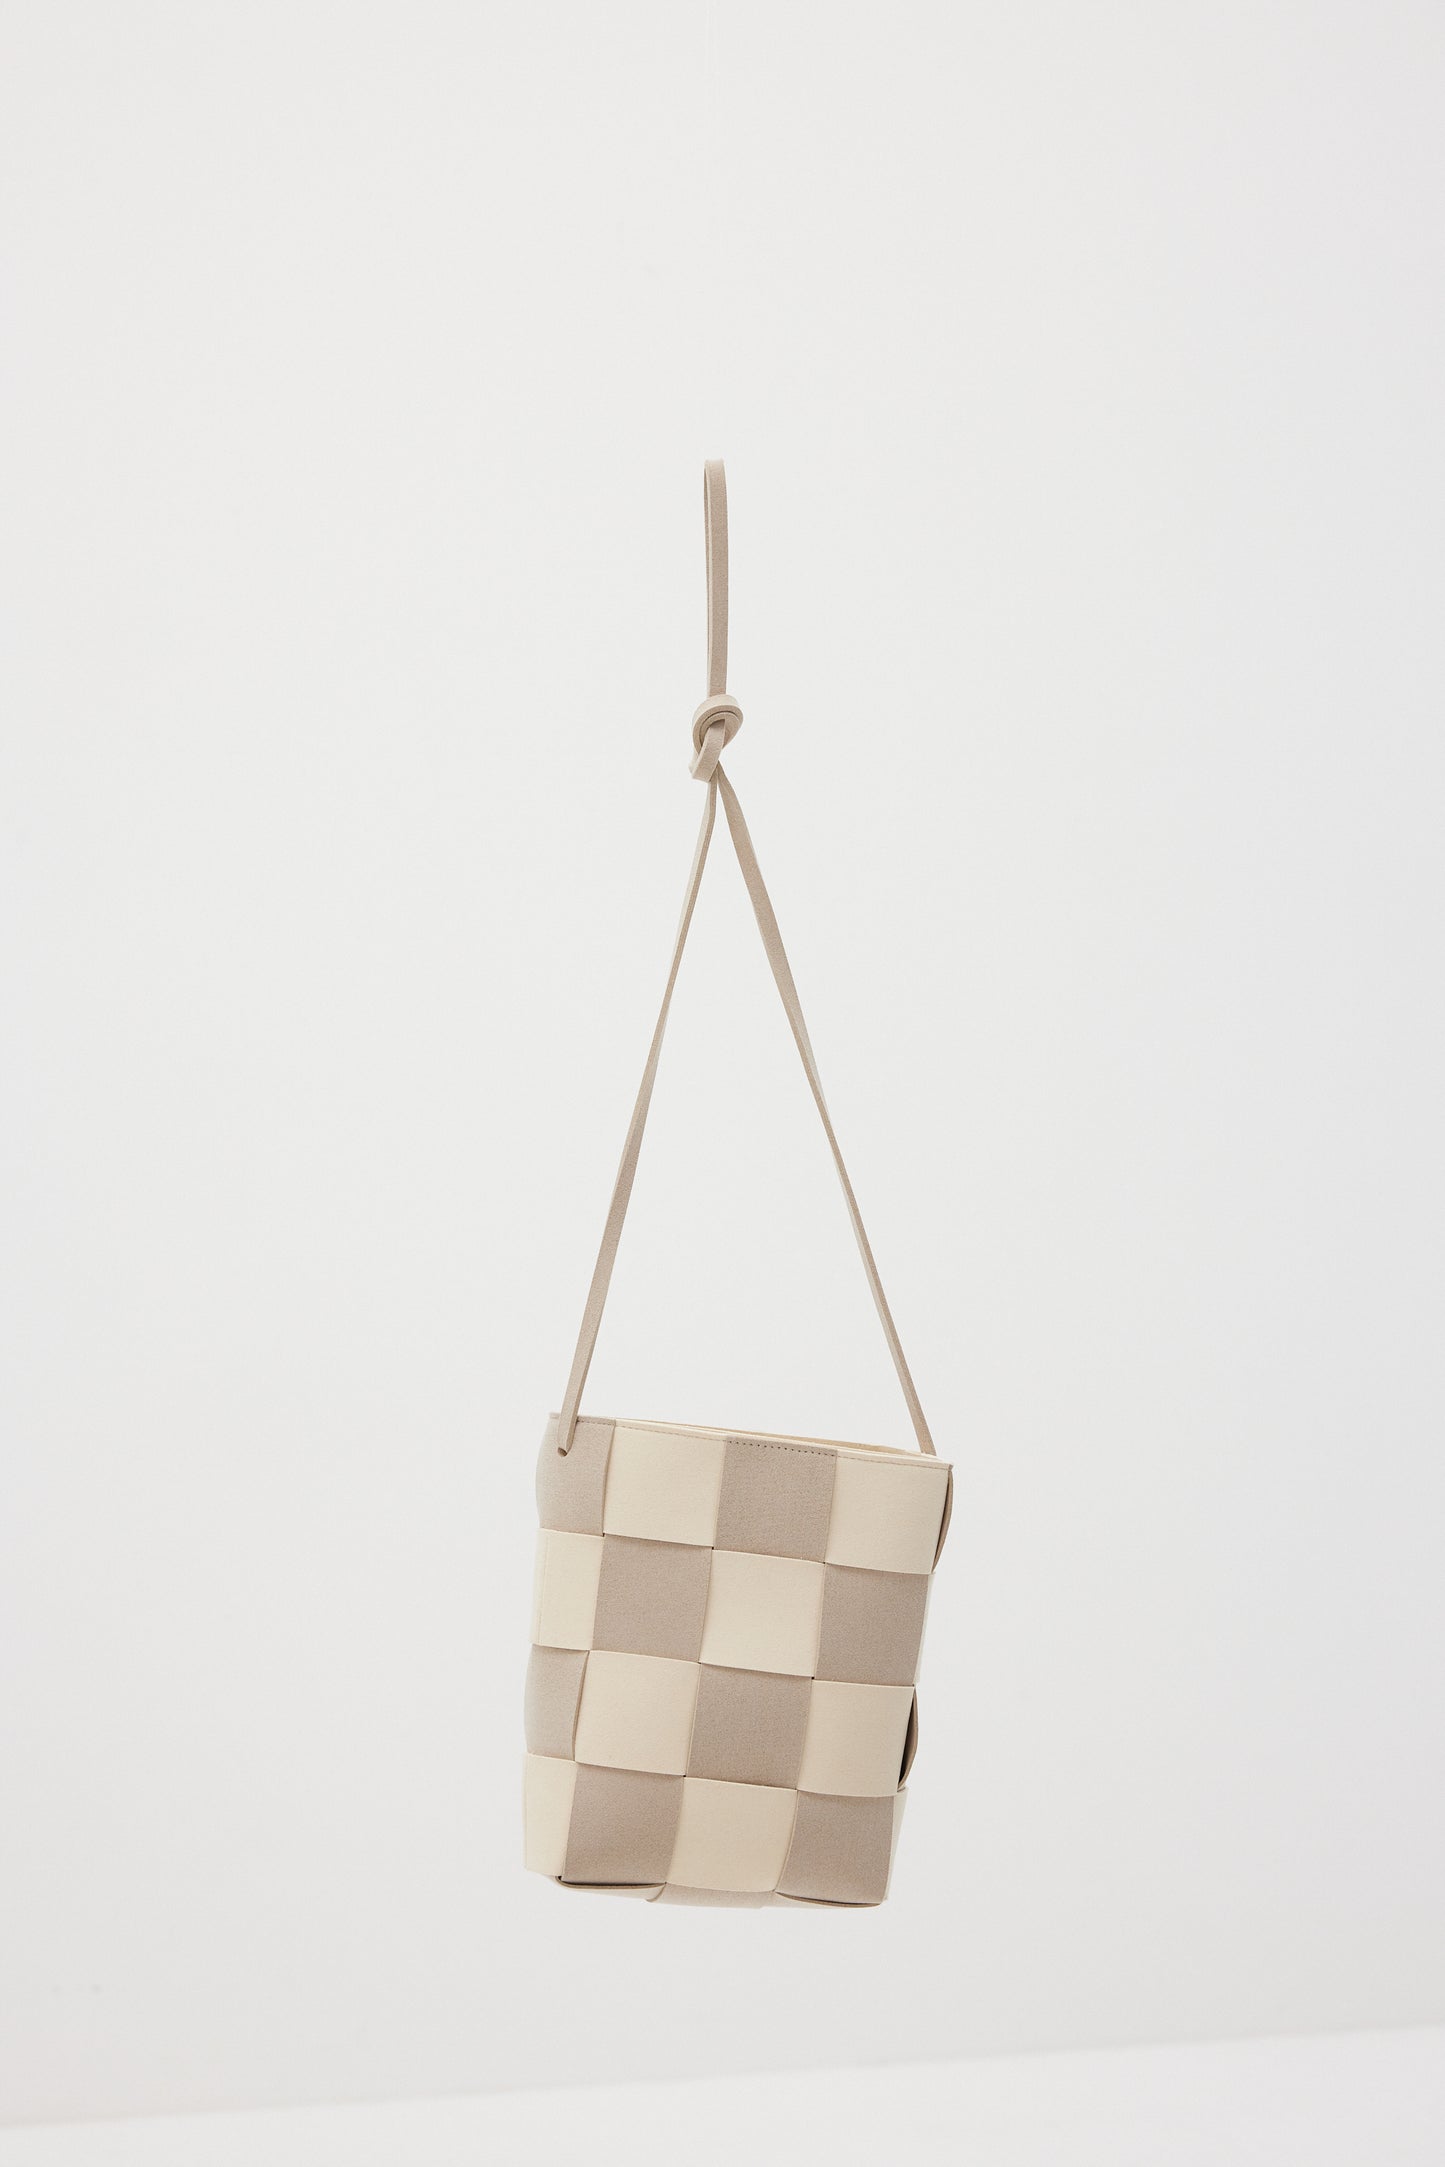 Checkered Weave Leather Bag, Milk Chocolate